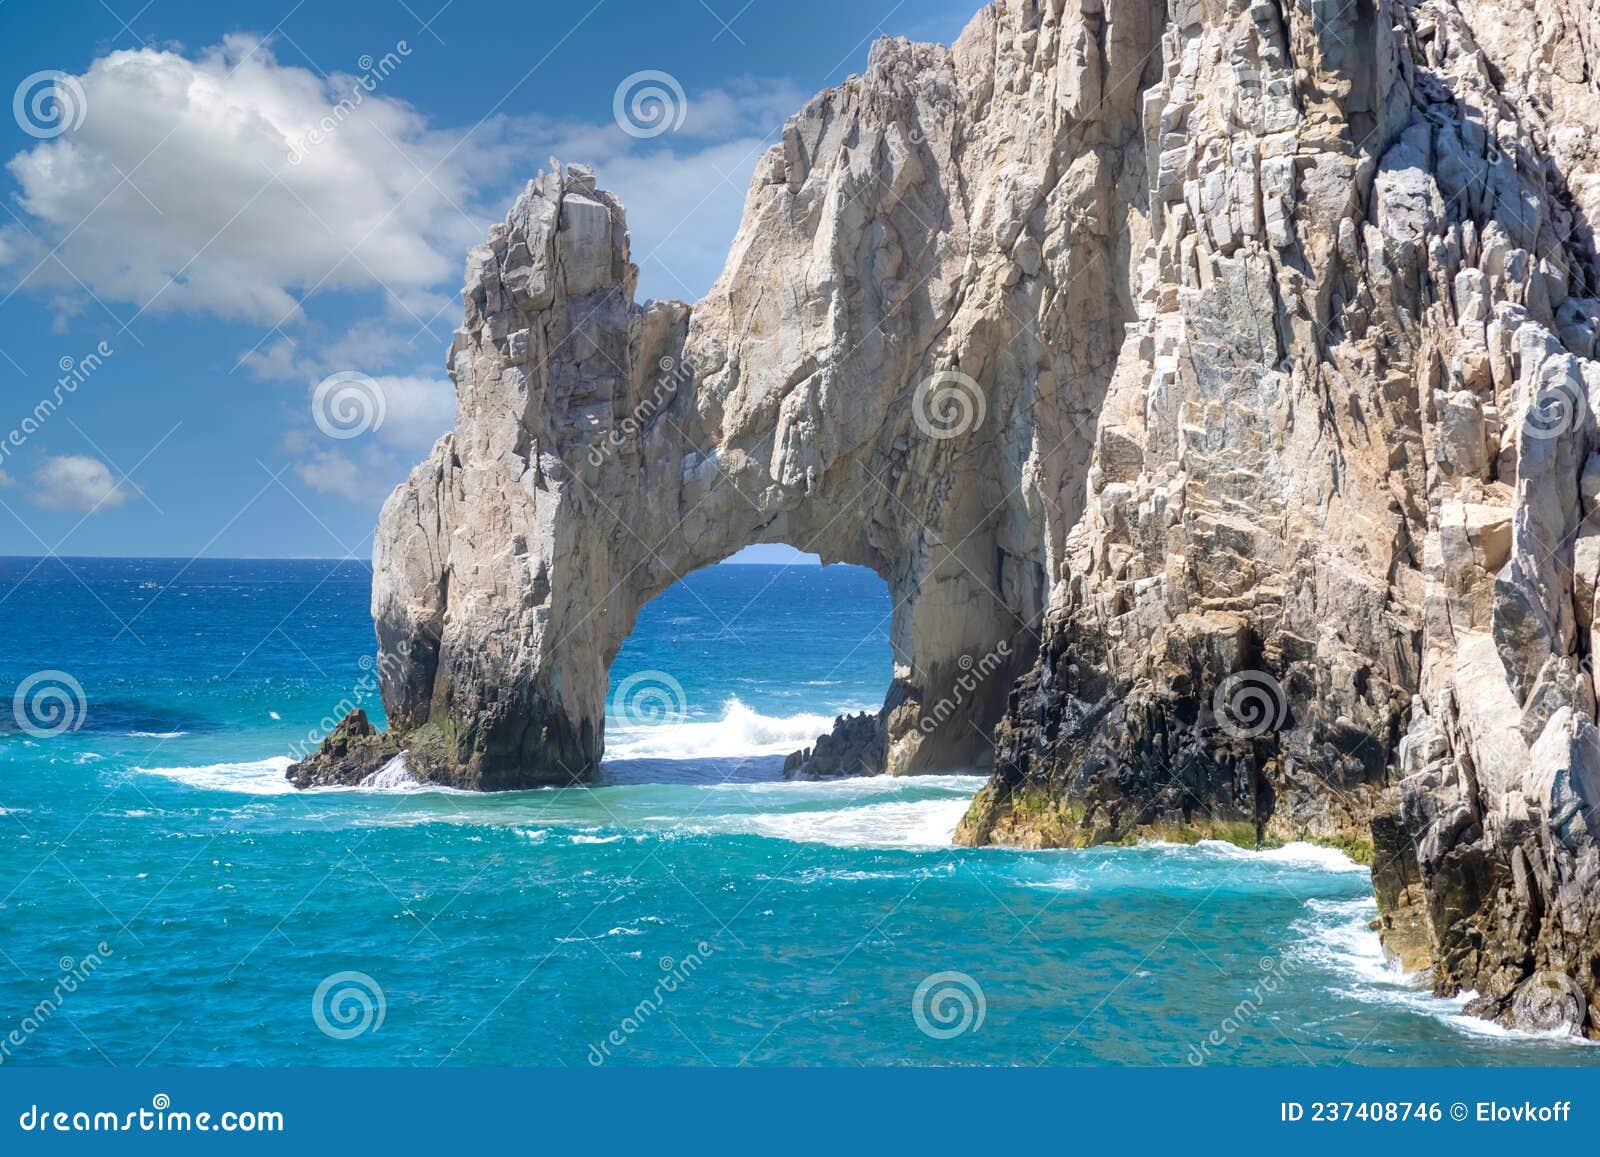 scenic tourist destination arch of cabo san lucas, el arco, close to playa amantes, lovers beach known as playa del amor